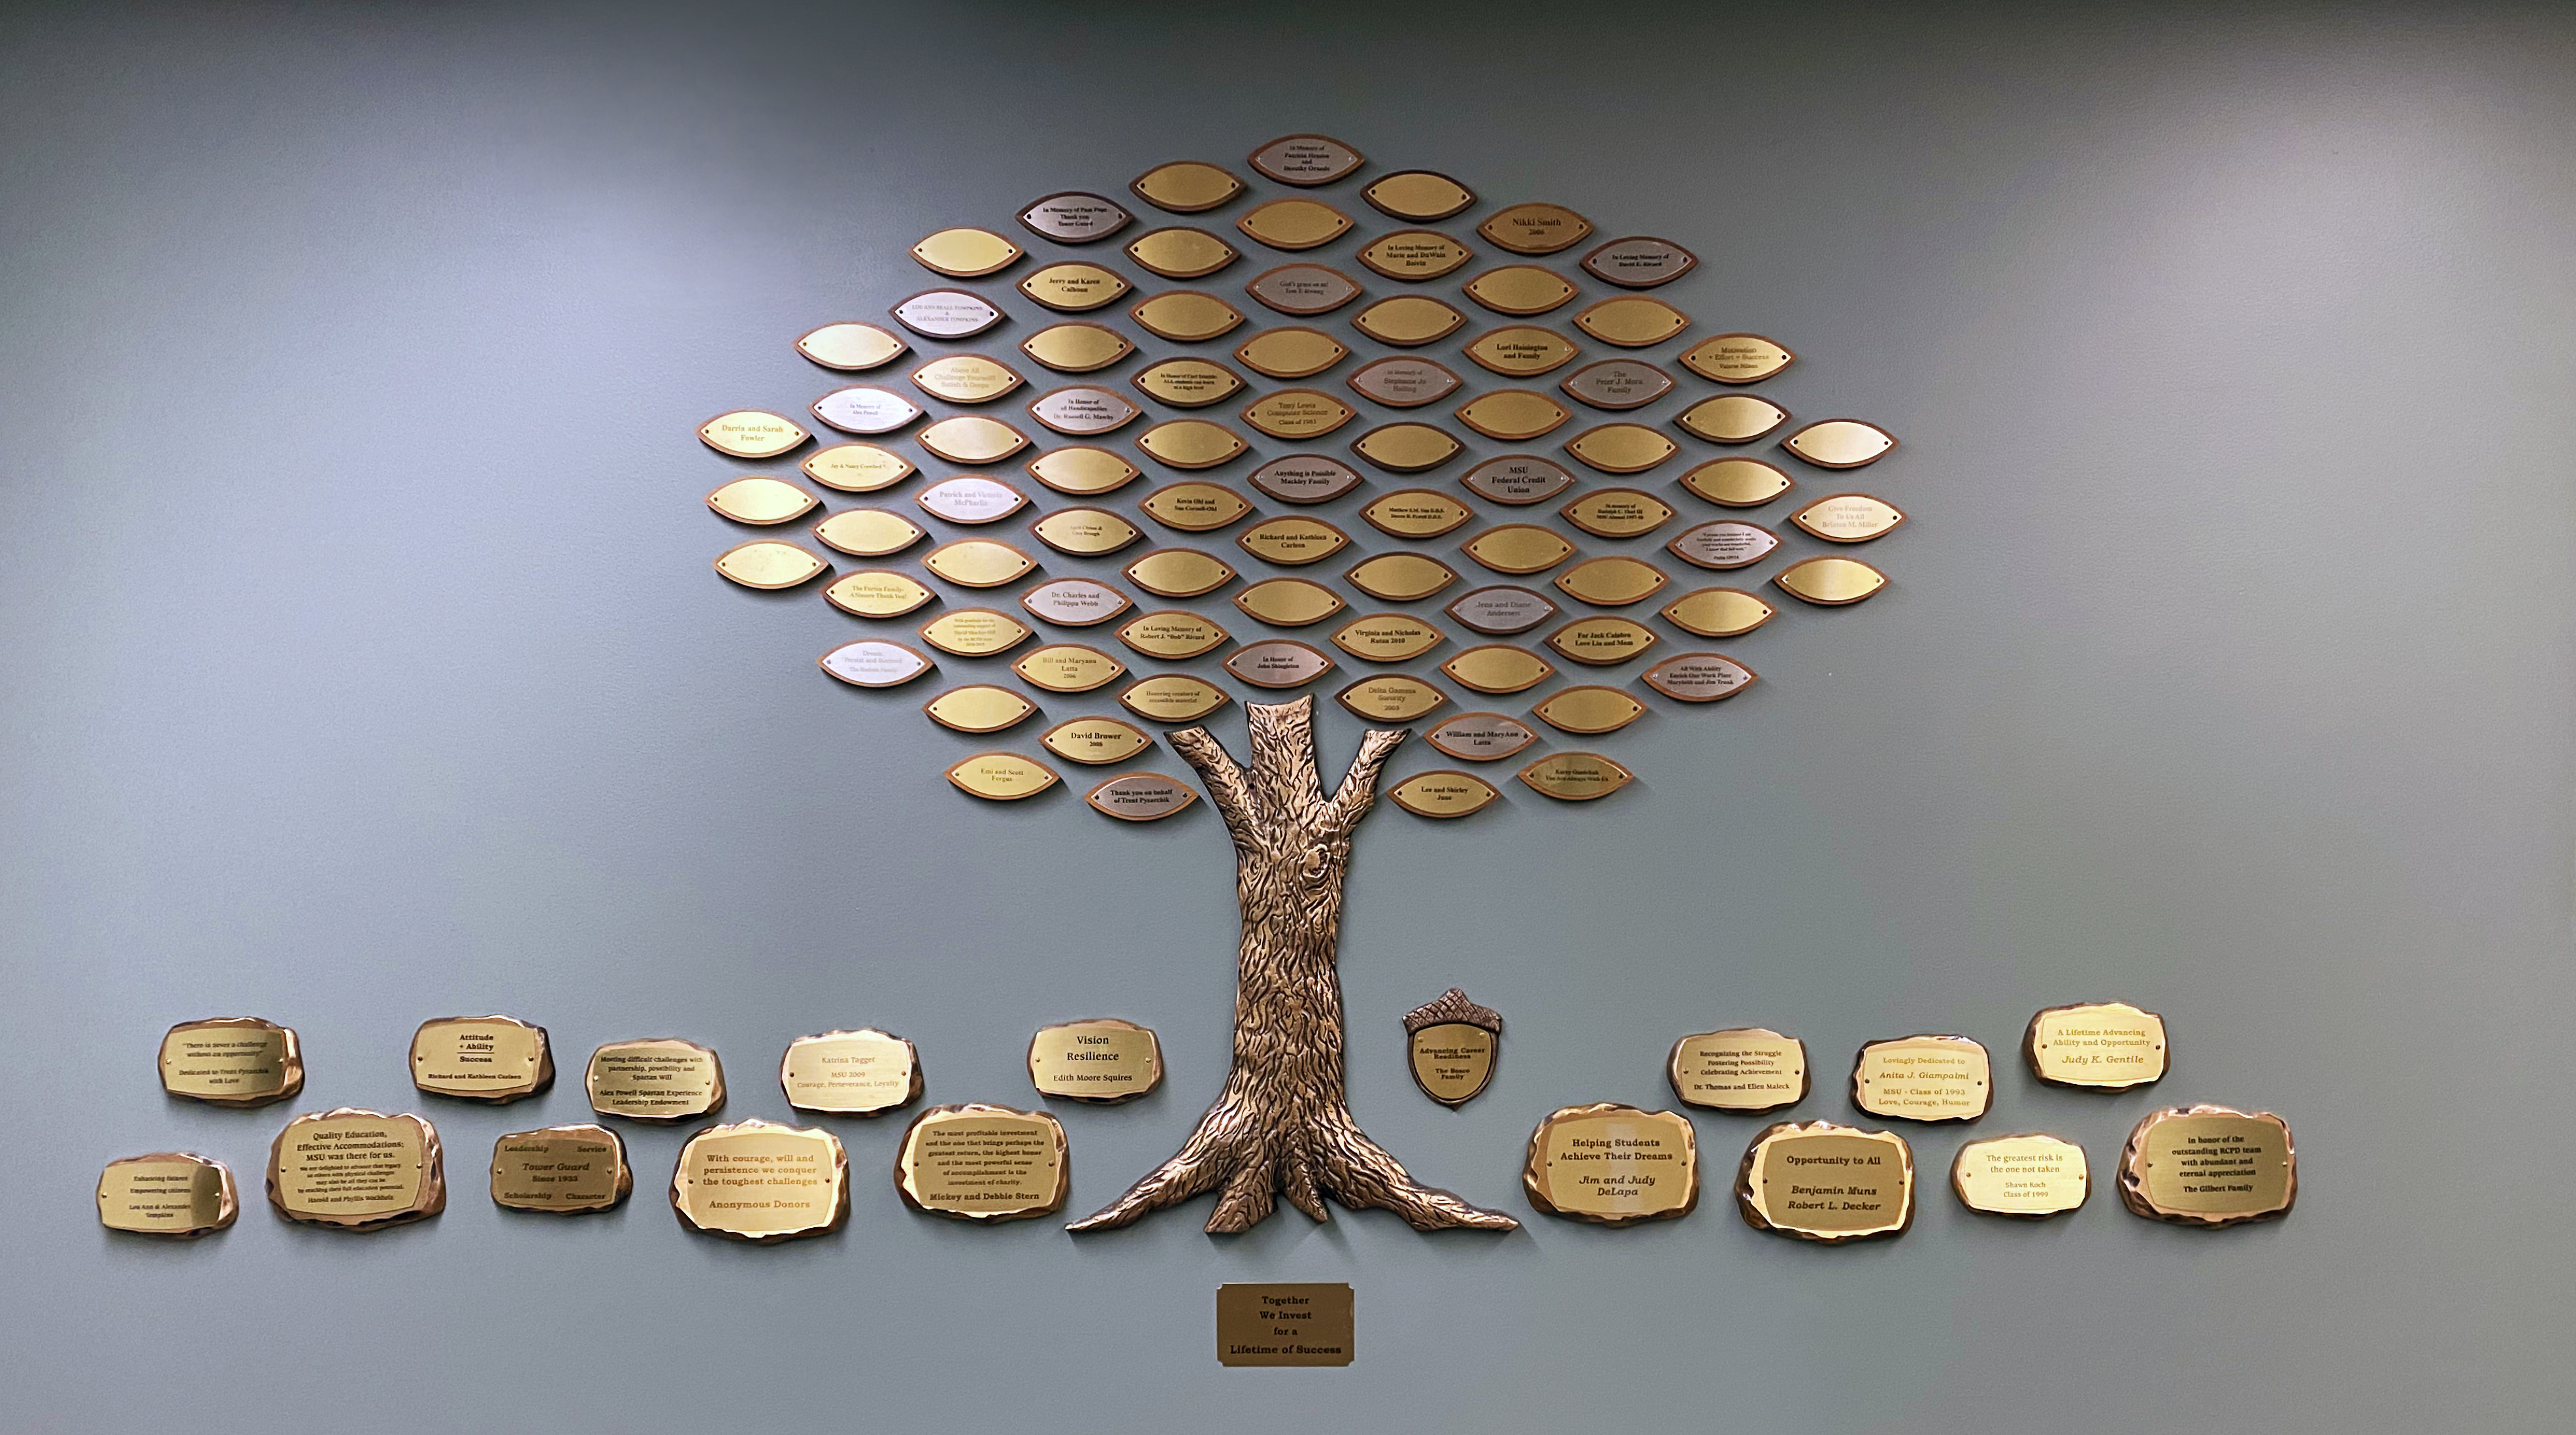 Photograph: RCPD donor tree depicting inscribed leaves, rocks, and acorns